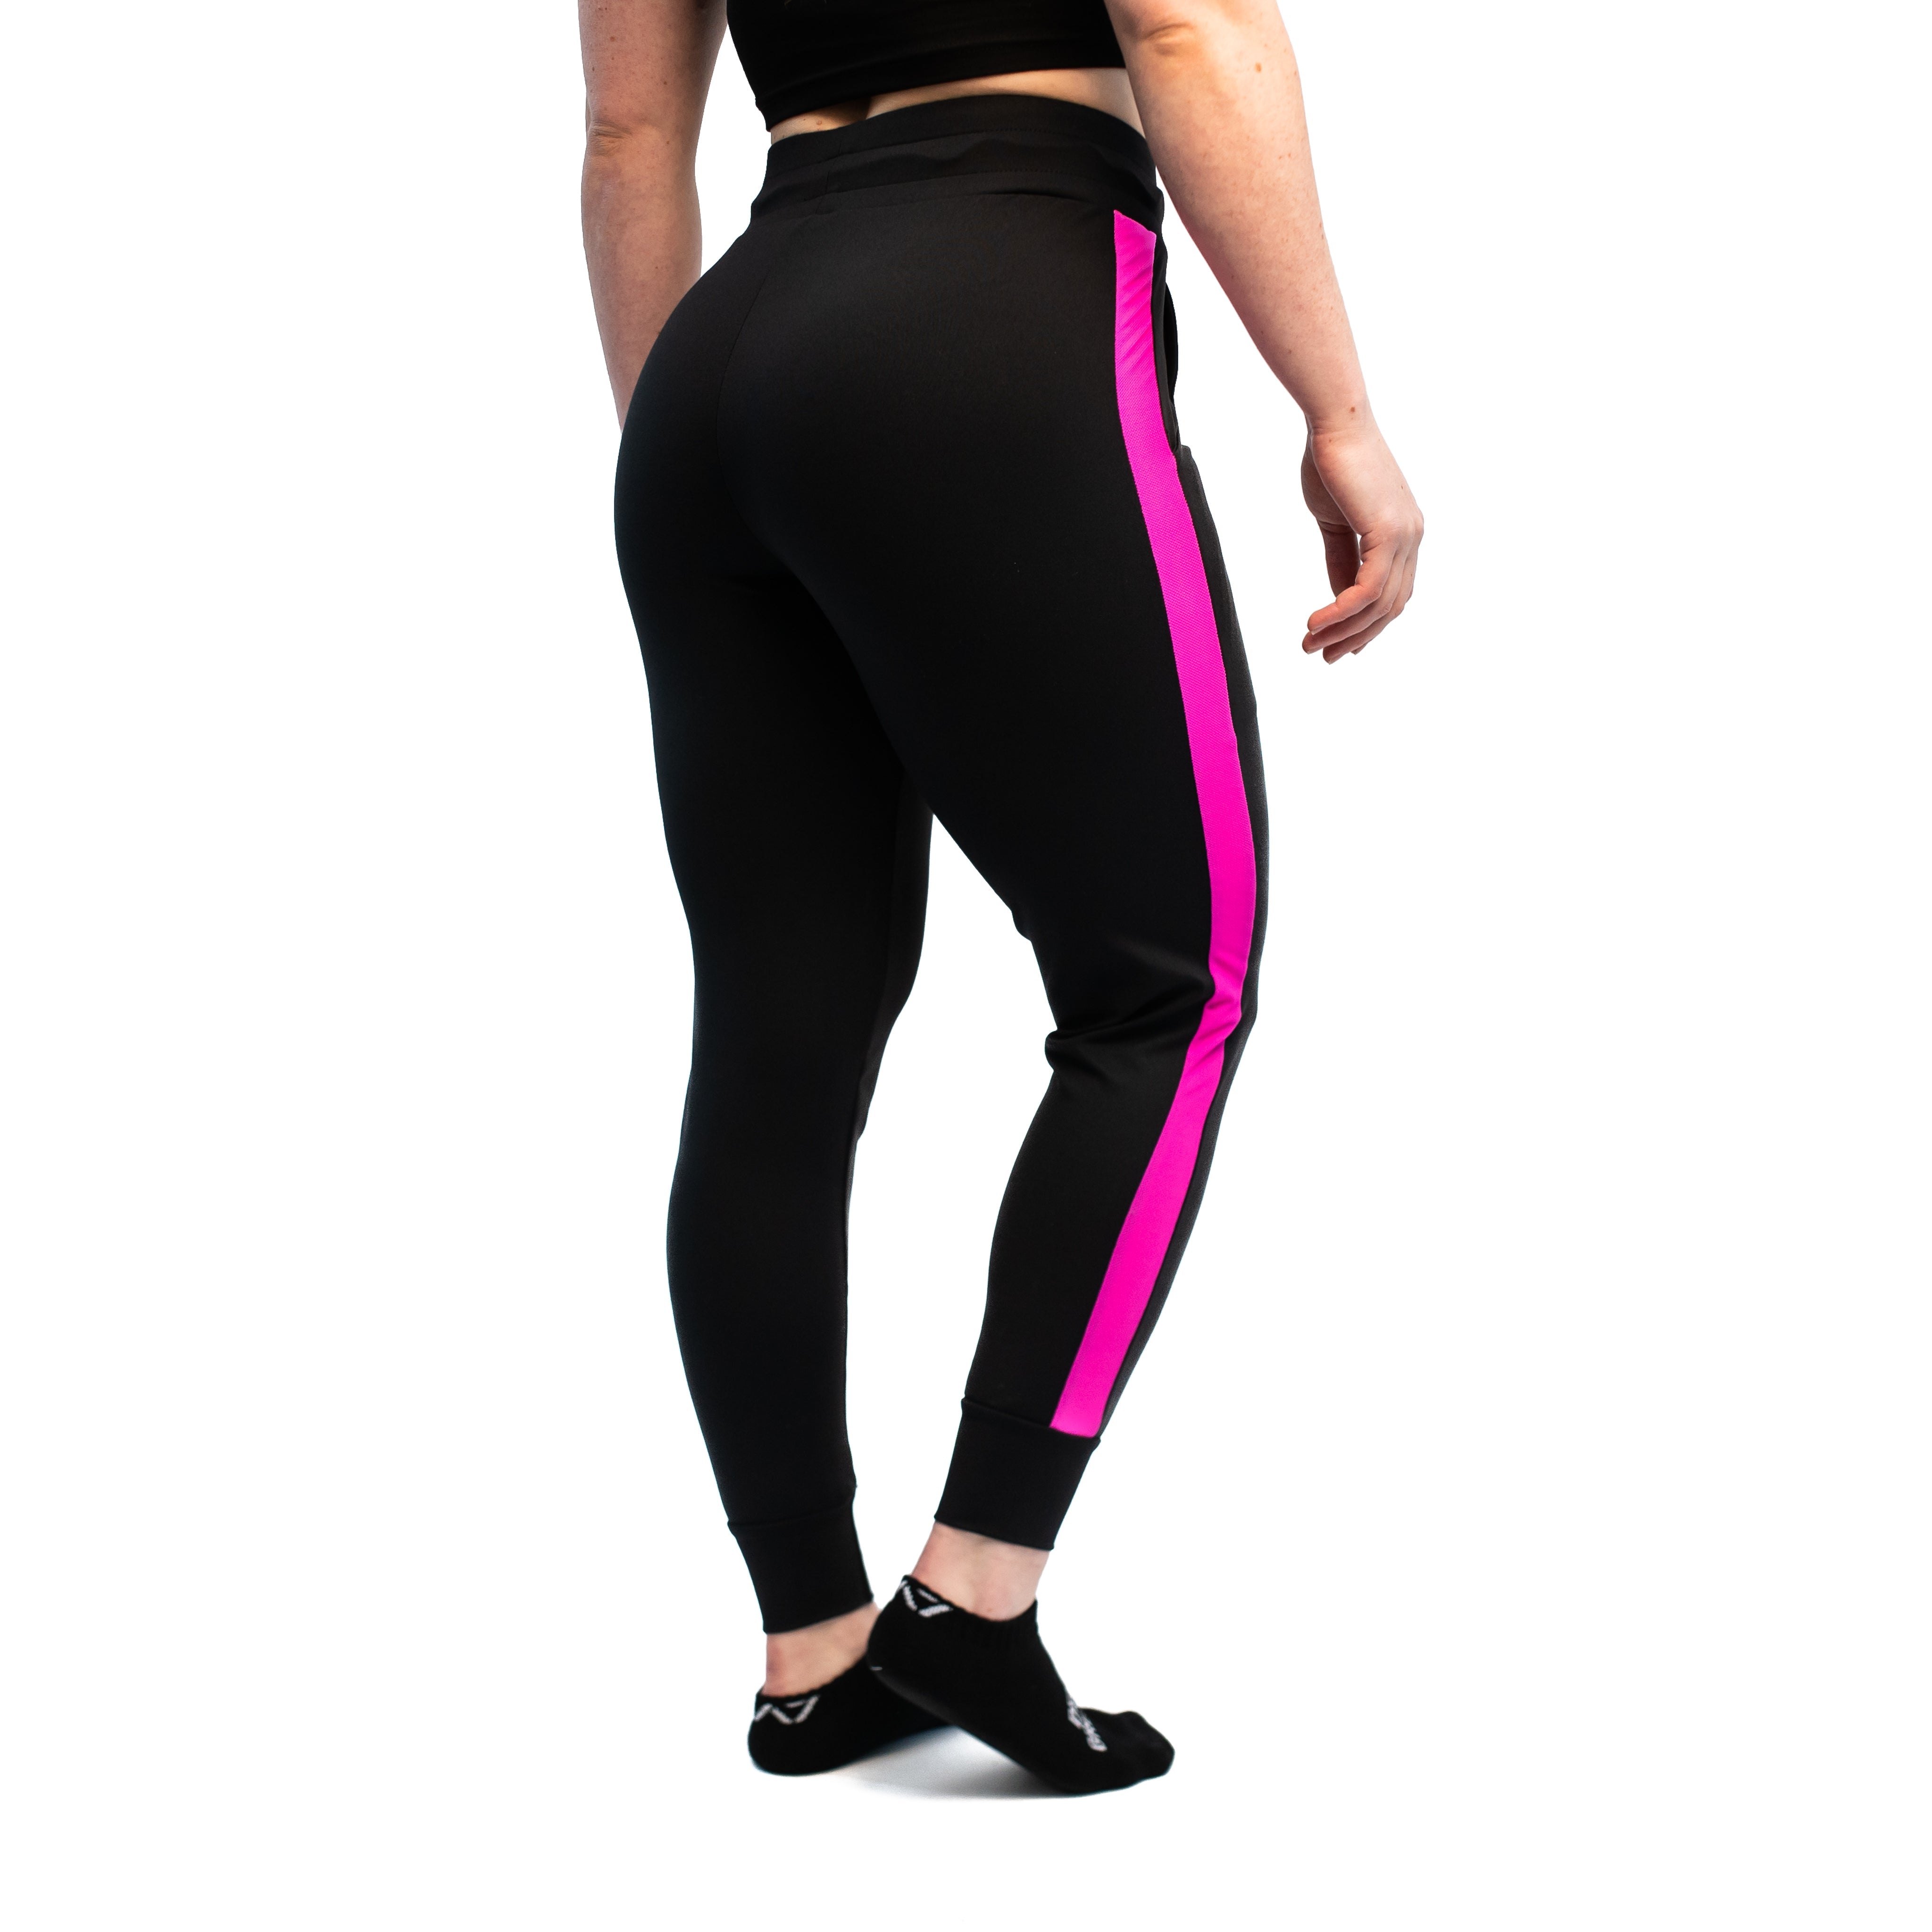 A7’s newest Women's Joggers are made with the same premium Defy fabric you have come to love, but with female curves (flexure) in mind! Using 4-way-stretch material, these flexure joggers are specifically designed for Women's unique shape. Flexure women’s joggers in pink are available to buy from A7UK for shipping to UK and Europe.